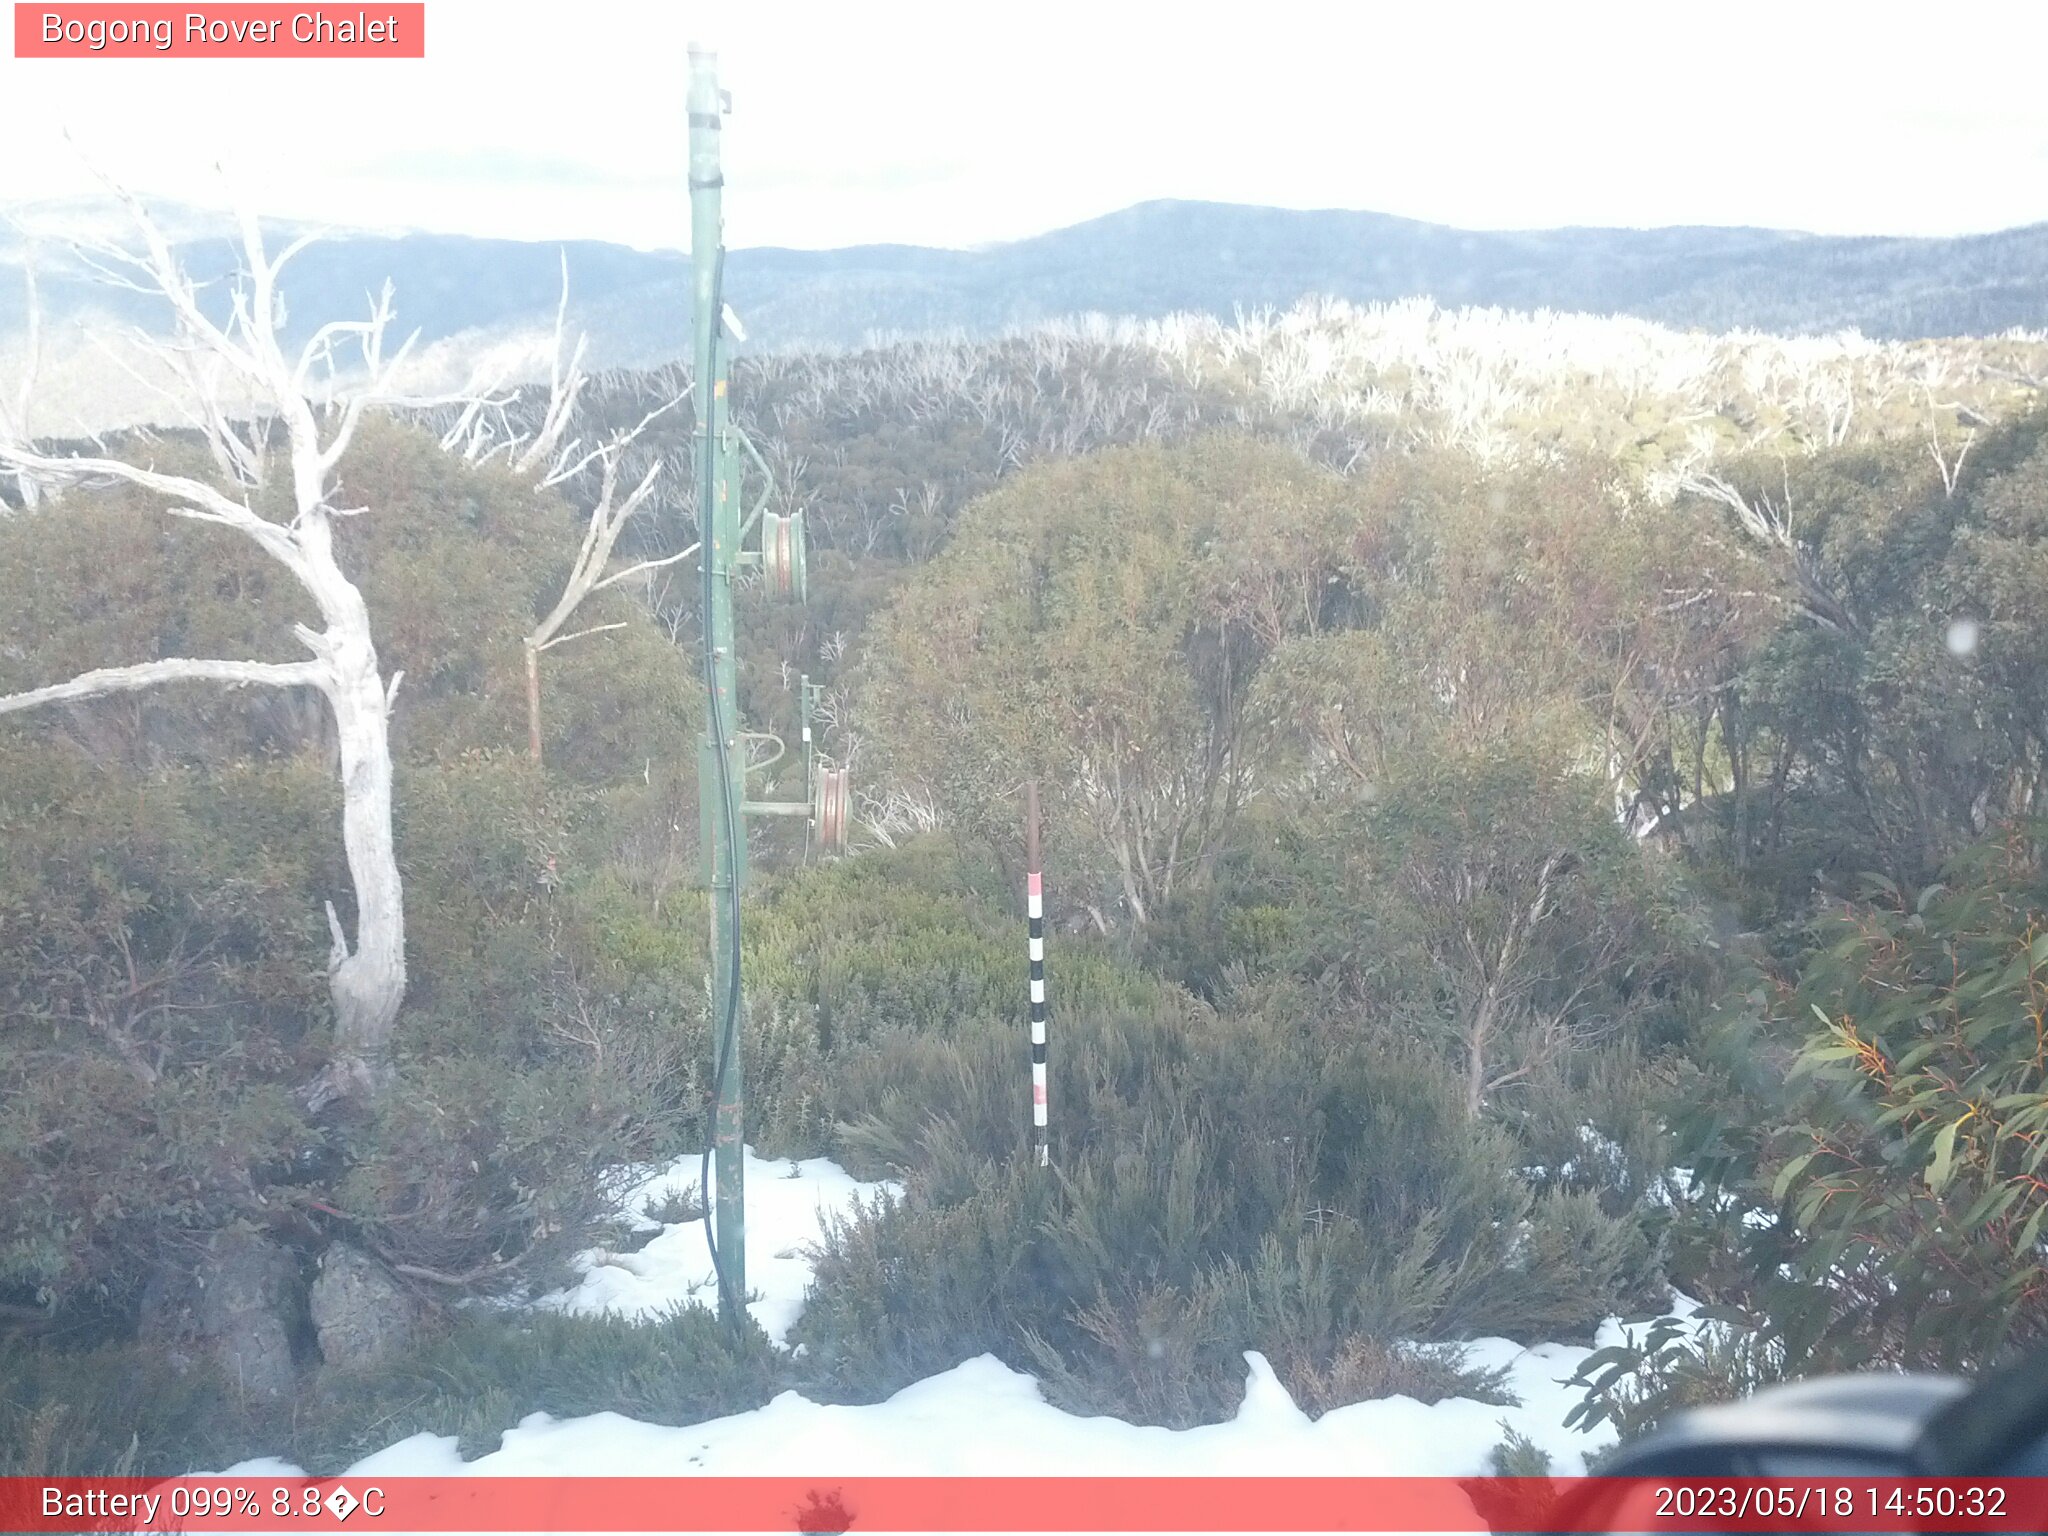 Bogong Web Cam 2:50pm Thursday 18th of May 2023